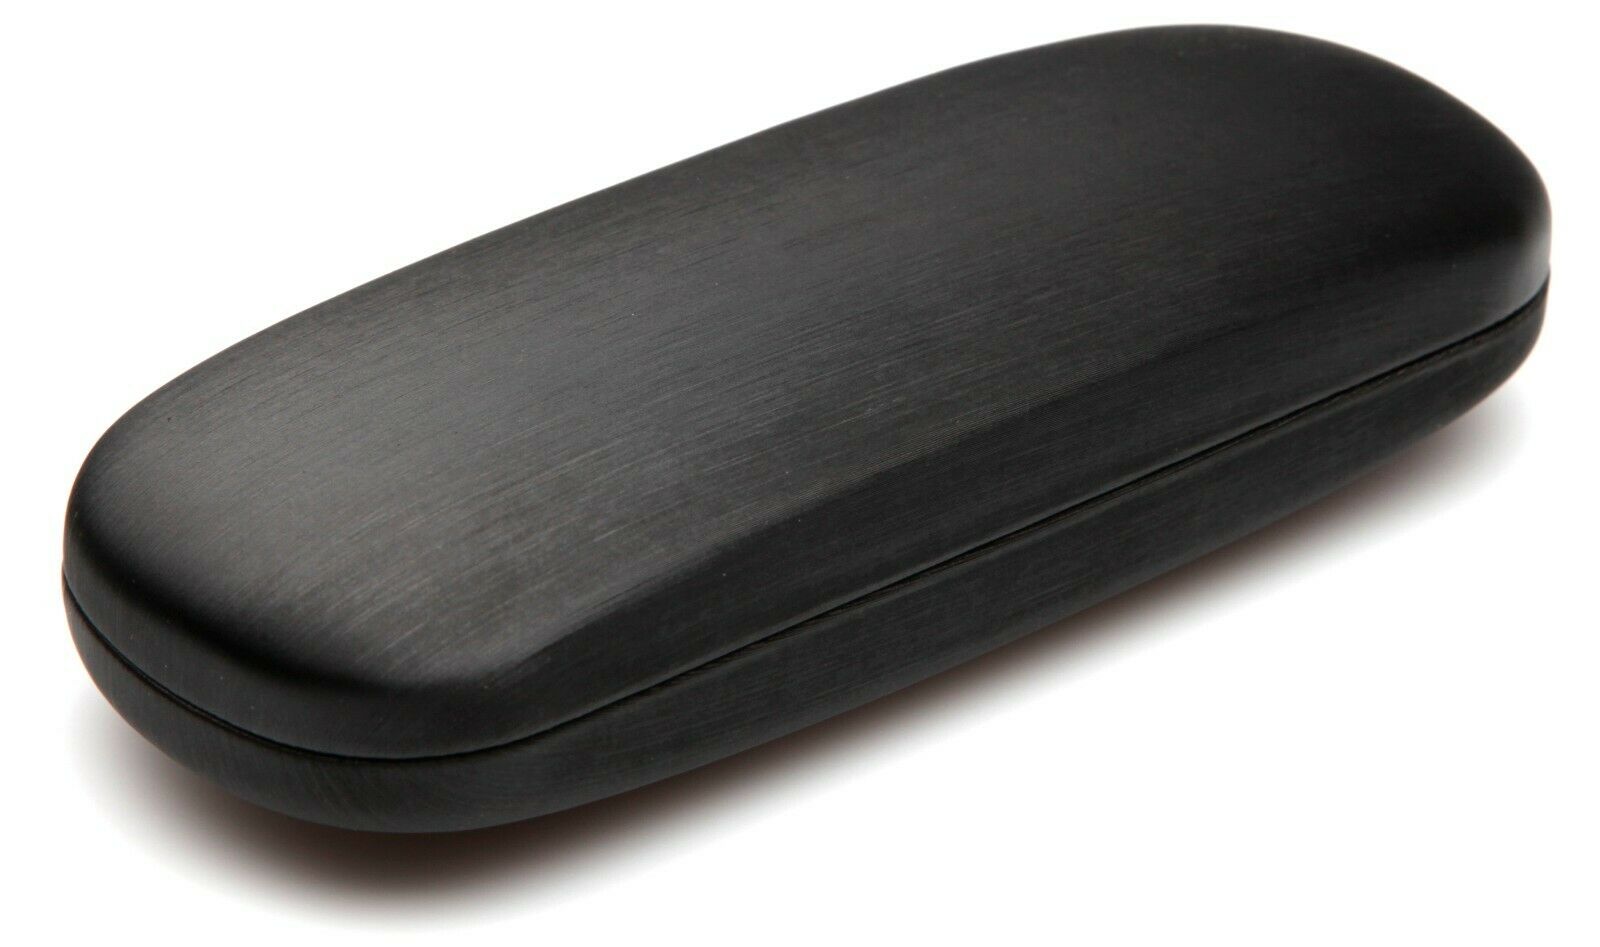 New Clam Shell Hard Eyeglasses Glasses Case Black W/ Microfiber Cleaning Cloth